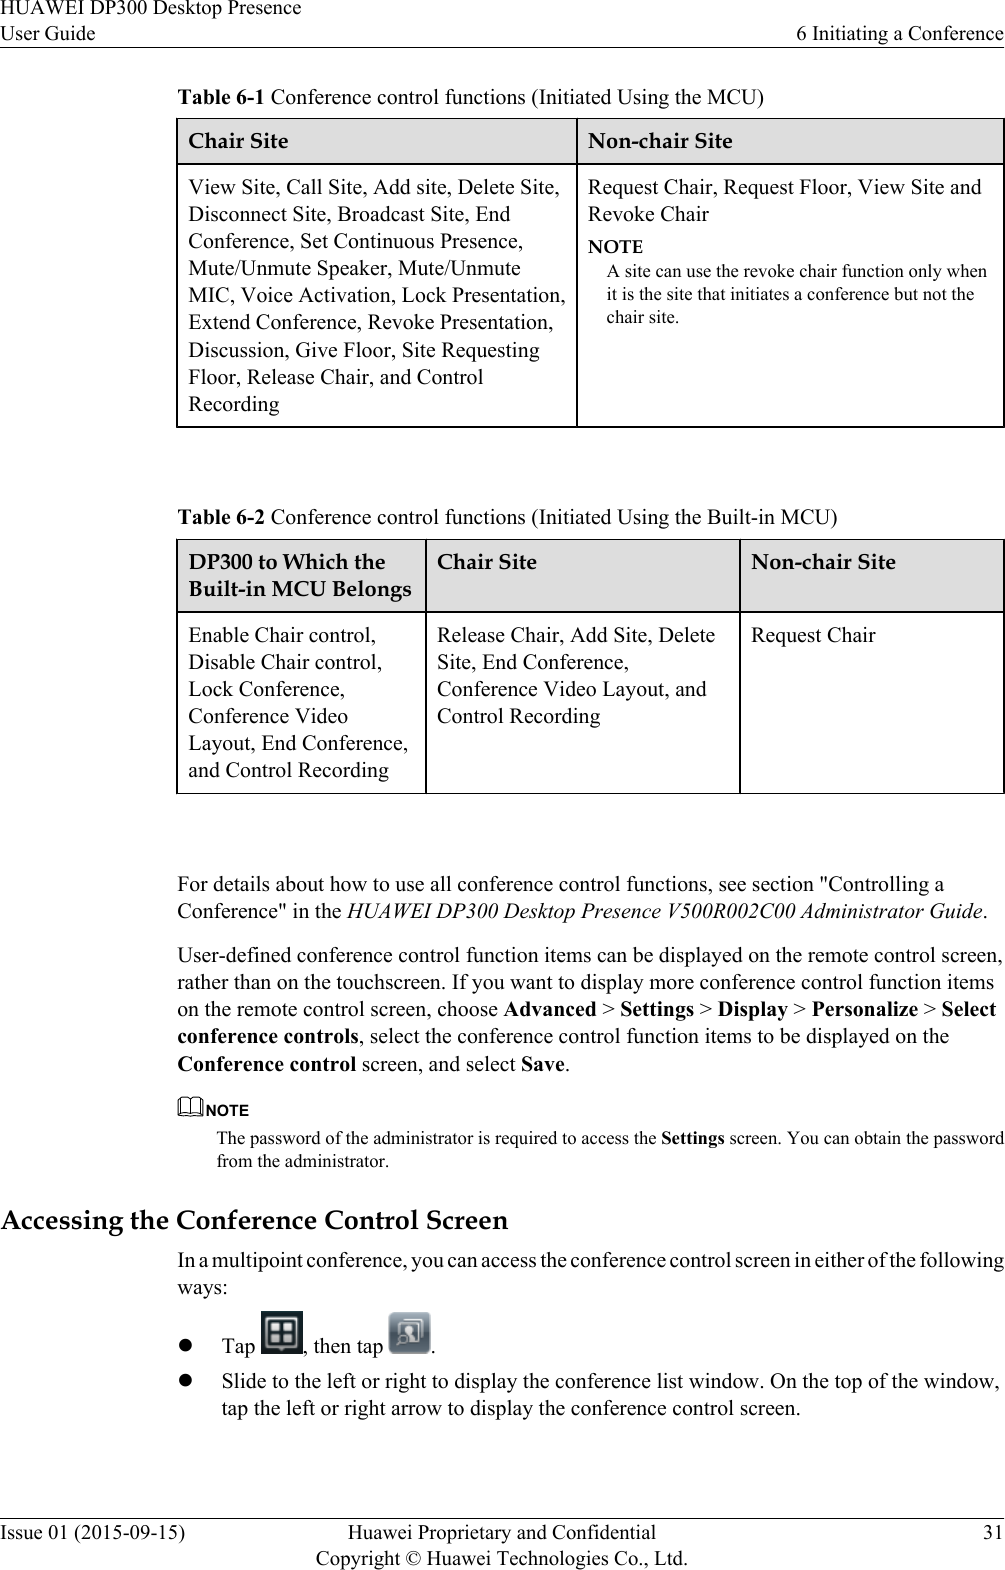 Table 6-1 Conference control functions (Initiated Using the MCU)Chair Site Non-chair SiteView Site, Call Site, Add site, Delete Site,Disconnect Site, Broadcast Site, EndConference, Set Continuous Presence,Mute/Unmute Speaker, Mute/UnmuteMIC, Voice Activation, Lock Presentation,Extend Conference, Revoke Presentation,Discussion, Give Floor, Site RequestingFloor, Release Chair, and ControlRecordingRequest Chair, Request Floor, View Site andRevoke ChairNOTEA site can use the revoke chair function only whenit is the site that initiates a conference but not thechair site. Table 6-2 Conference control functions (Initiated Using the Built-in MCU)DP300 to Which theBuilt-in MCU BelongsChair Site Non-chair SiteEnable Chair control,Disable Chair control,Lock Conference,Conference VideoLayout, End Conference,and Control RecordingRelease Chair, Add Site, DeleteSite, End Conference,Conference Video Layout, andControl RecordingRequest Chair For details about how to use all conference control functions, see section &quot;Controlling aConference&quot; in the HUAWEI DP300 Desktop Presence V500R002C00 Administrator Guide.User-defined conference control function items can be displayed on the remote control screen,rather than on the touchscreen. If you want to display more conference control function itemson the remote control screen, choose Advanced &gt; Settings &gt; Display &gt; Personalize &gt; Selectconference controls, select the conference control function items to be displayed on theConference control screen, and select Save.NOTEThe password of the administrator is required to access the Settings screen. You can obtain the passwordfrom the administrator.Accessing the Conference Control ScreenIn a multipoint conference, you can access the conference control screen in either of the followingways:lTap  , then tap  .lSlide to the left or right to display the conference list window. On the top of the window,tap the left or right arrow to display the conference control screen.HUAWEI DP300 Desktop PresenceUser Guide 6 Initiating a ConferenceIssue 01 (2015-09-15) Huawei Proprietary and ConfidentialCopyright © Huawei Technologies Co., Ltd.31